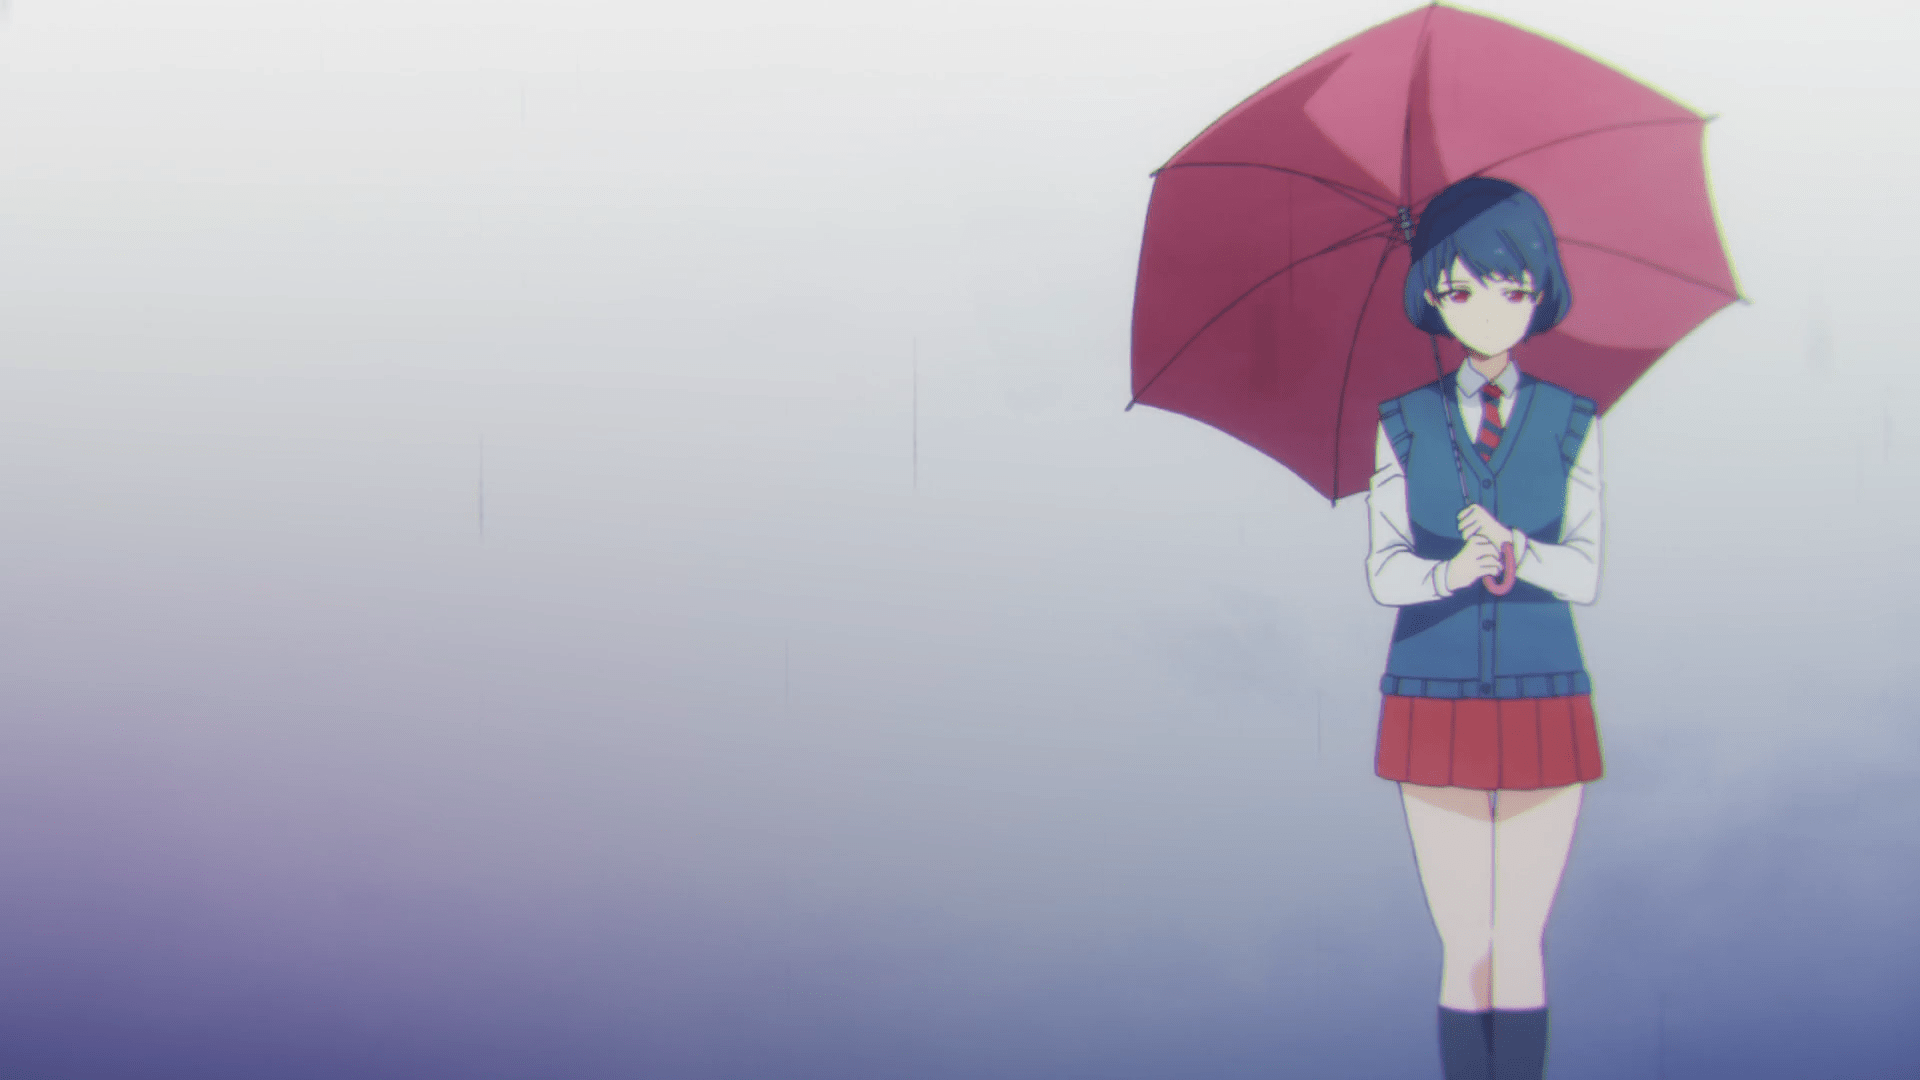 20+ Domestic Girlfriend HD Wallpapers and Backgrounds